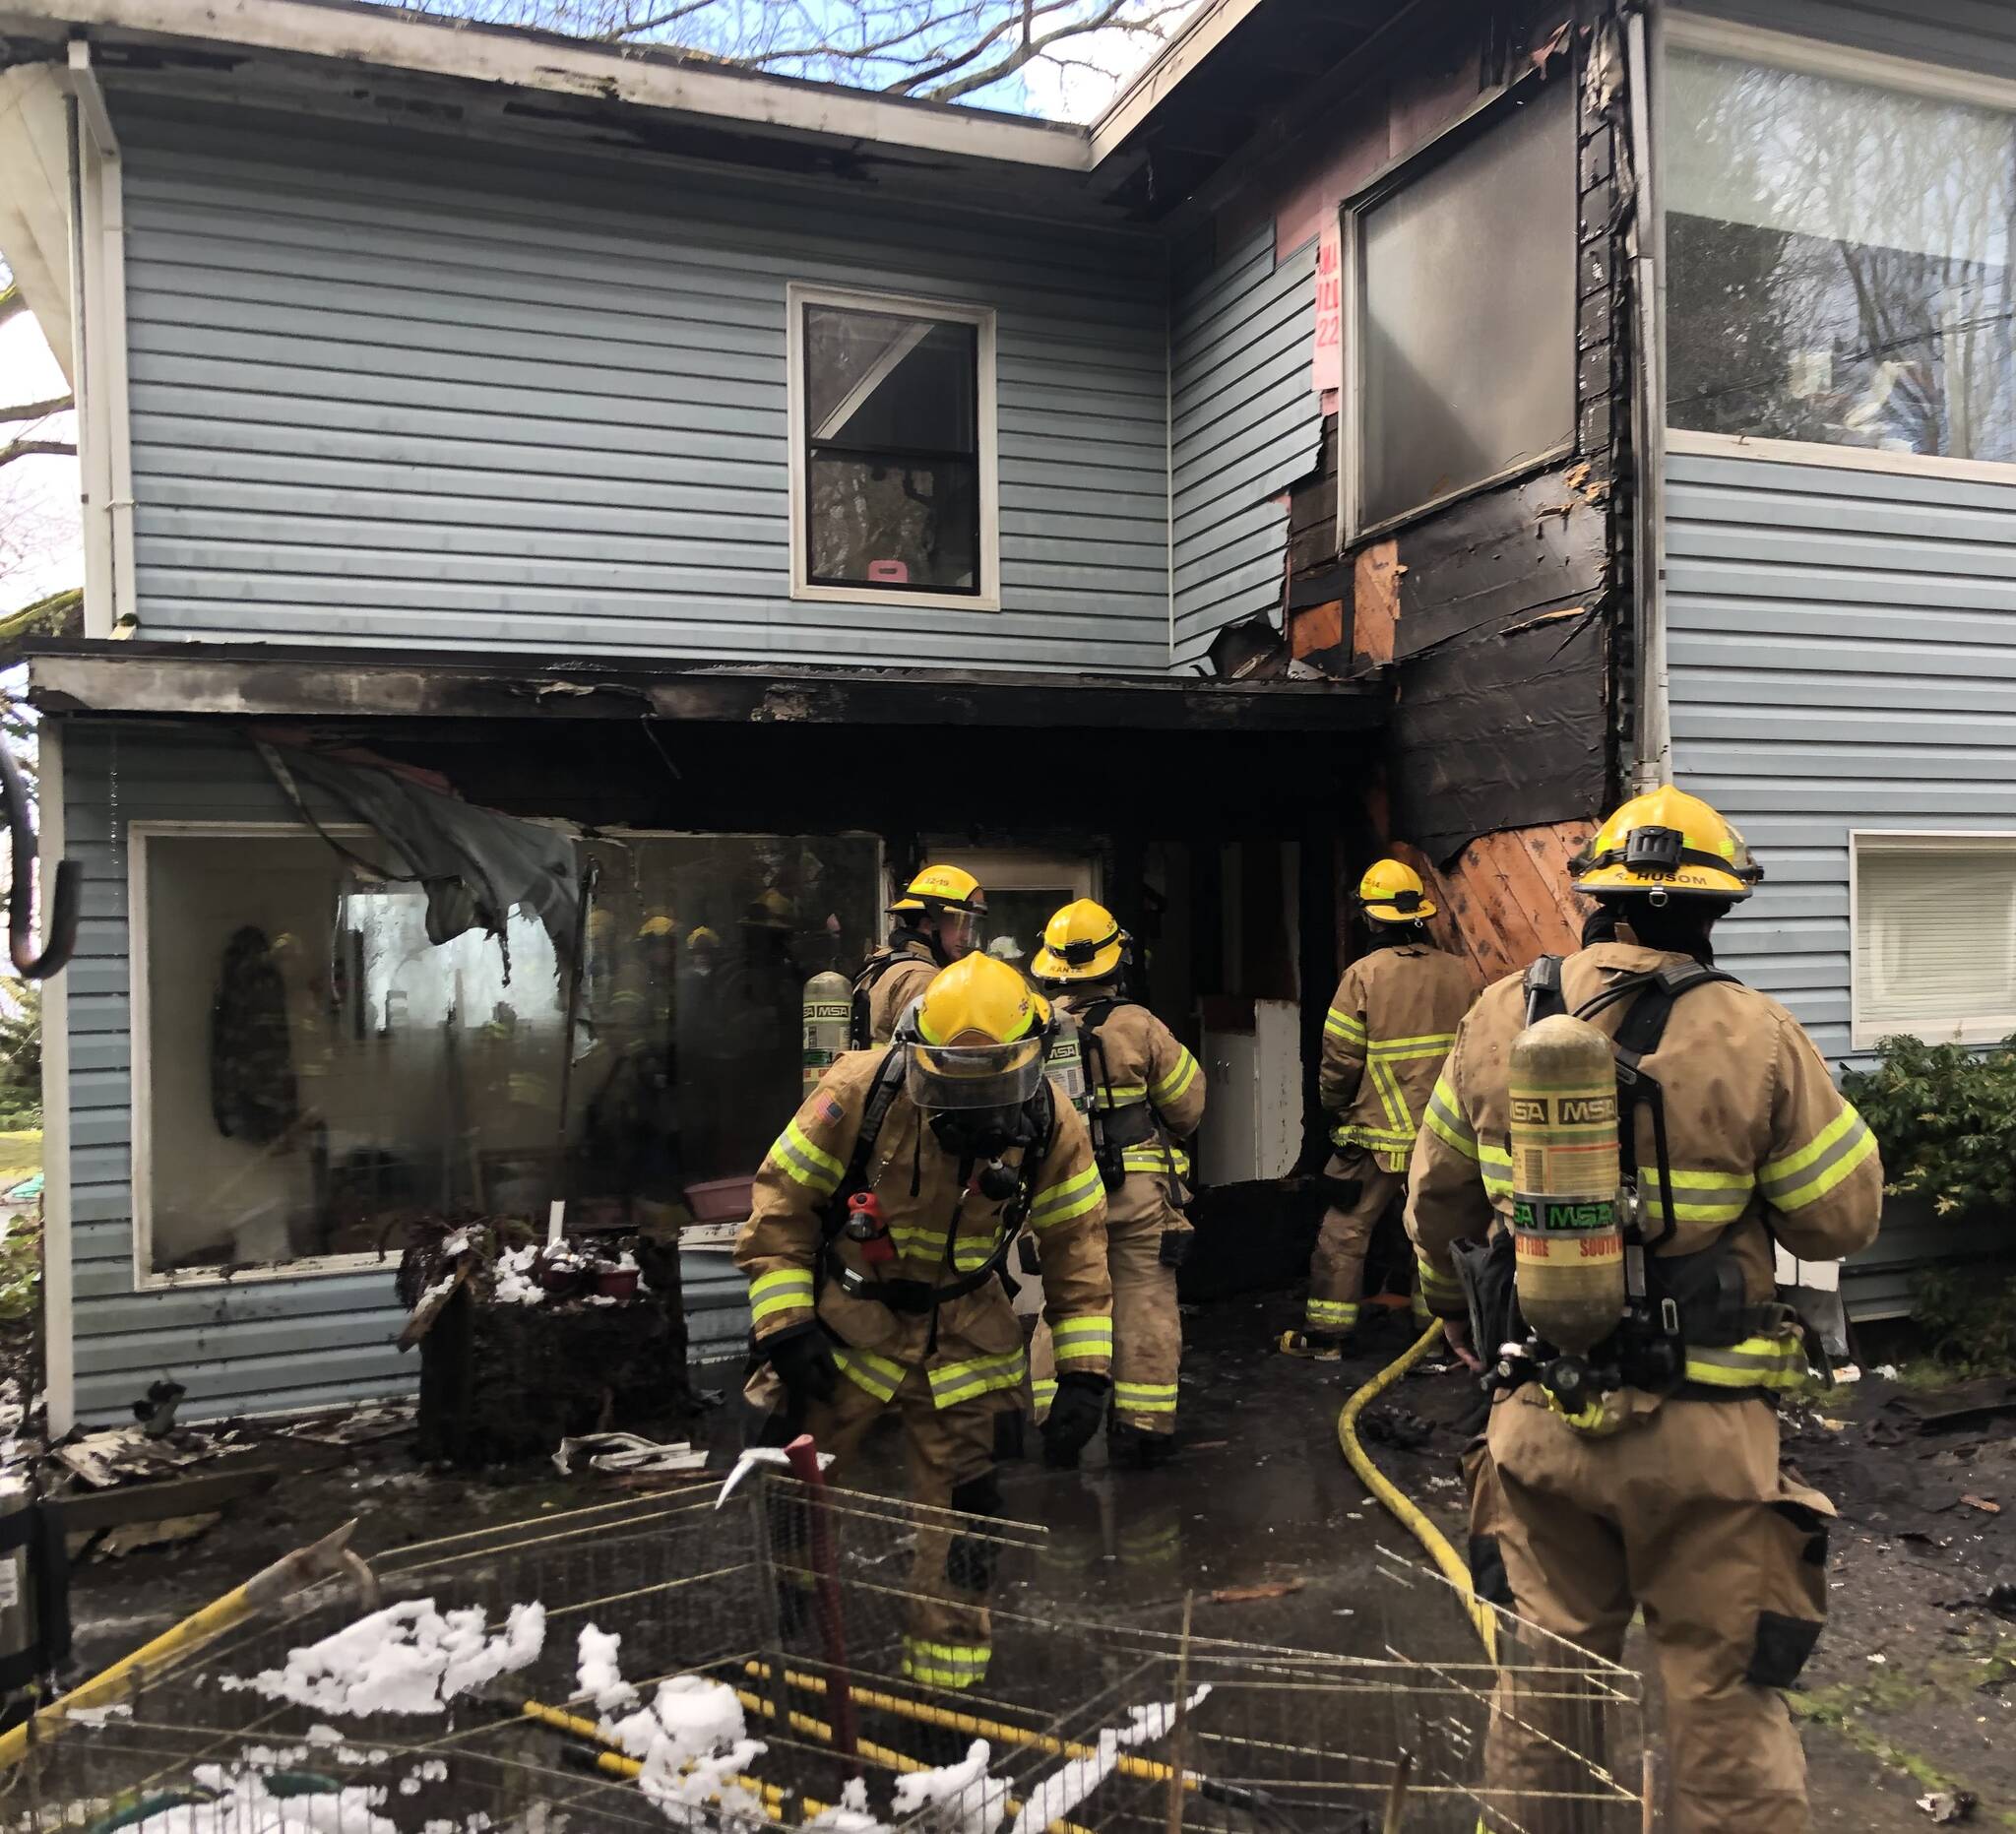 Photo provided
A fire ignited by a generator Monday caused damage to the outside of a South Whidbey home.